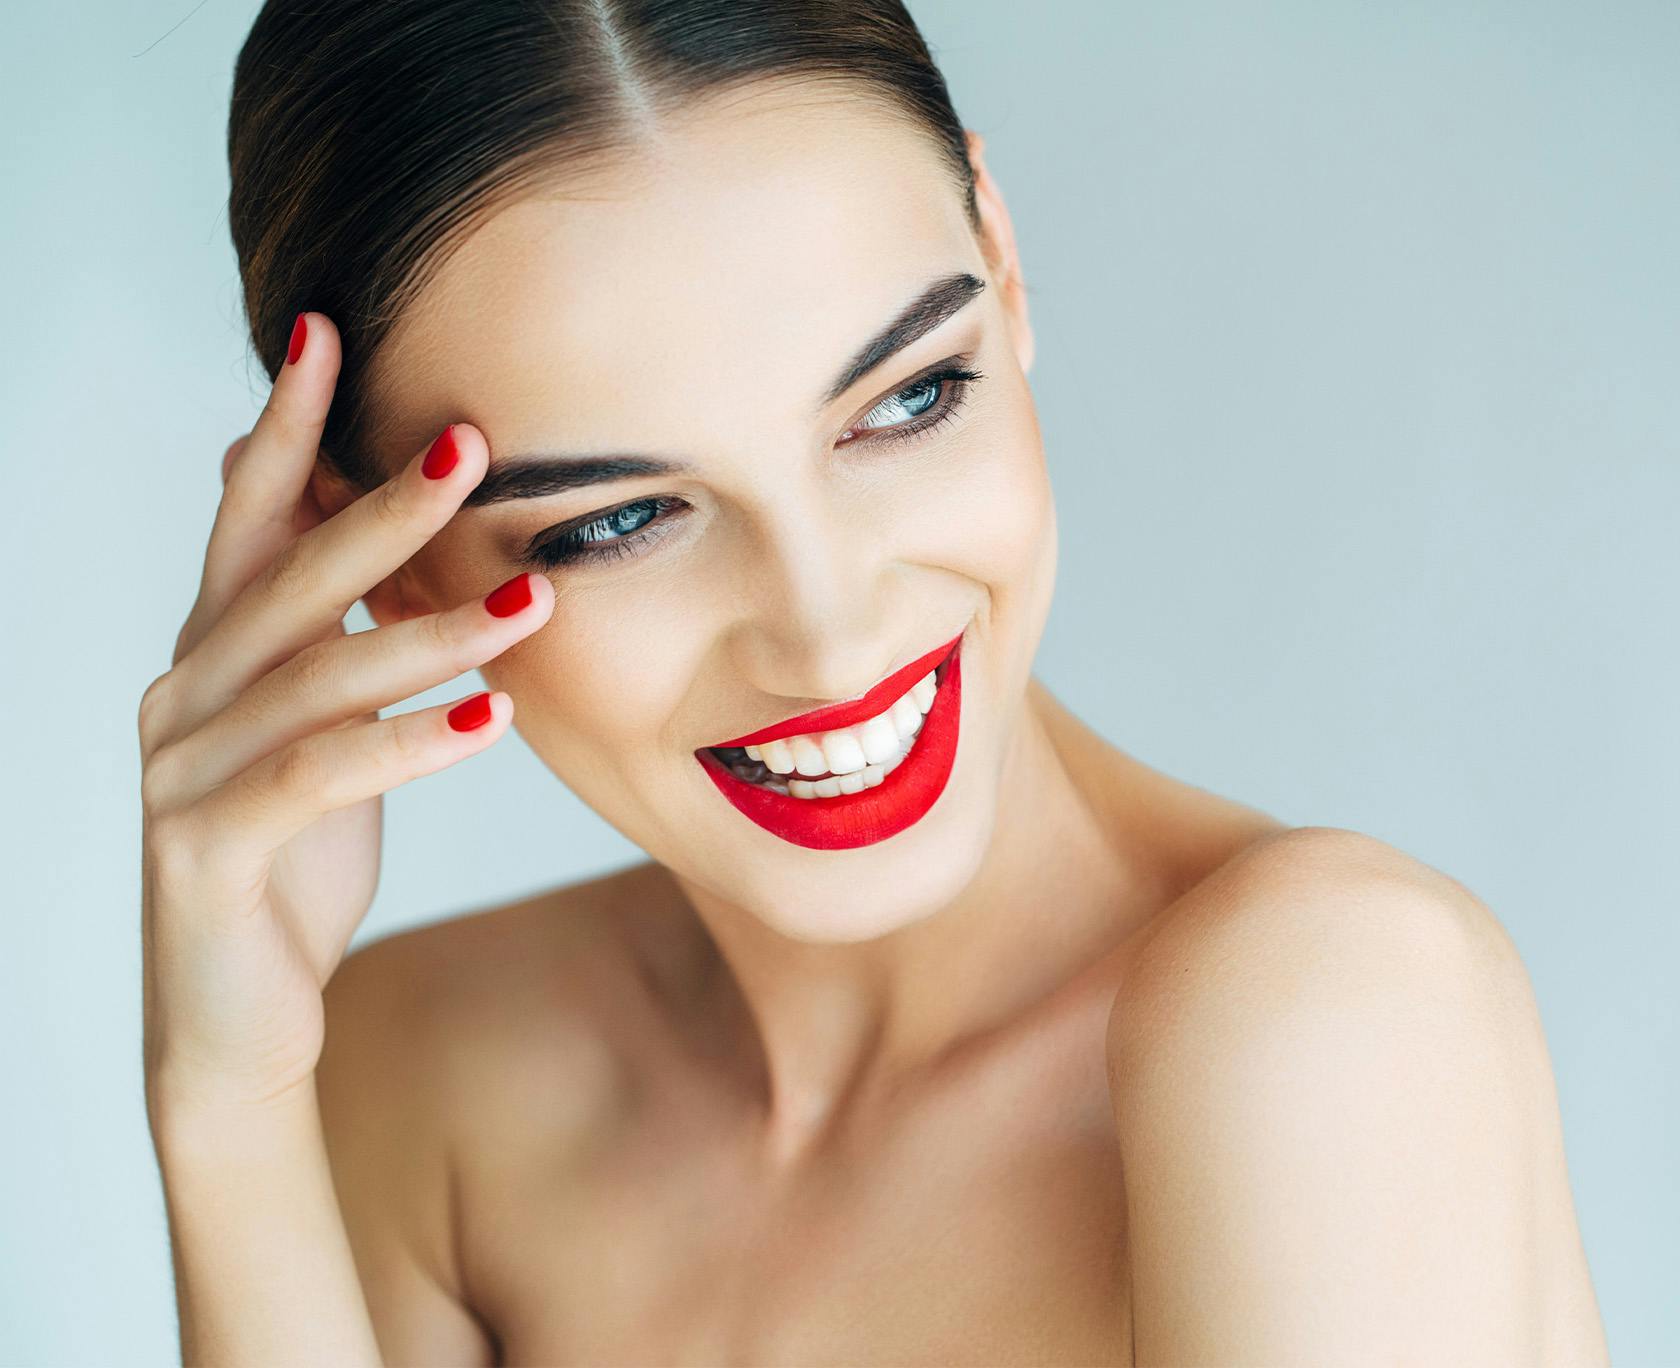 Woman with red lipstick and nail polish smiling